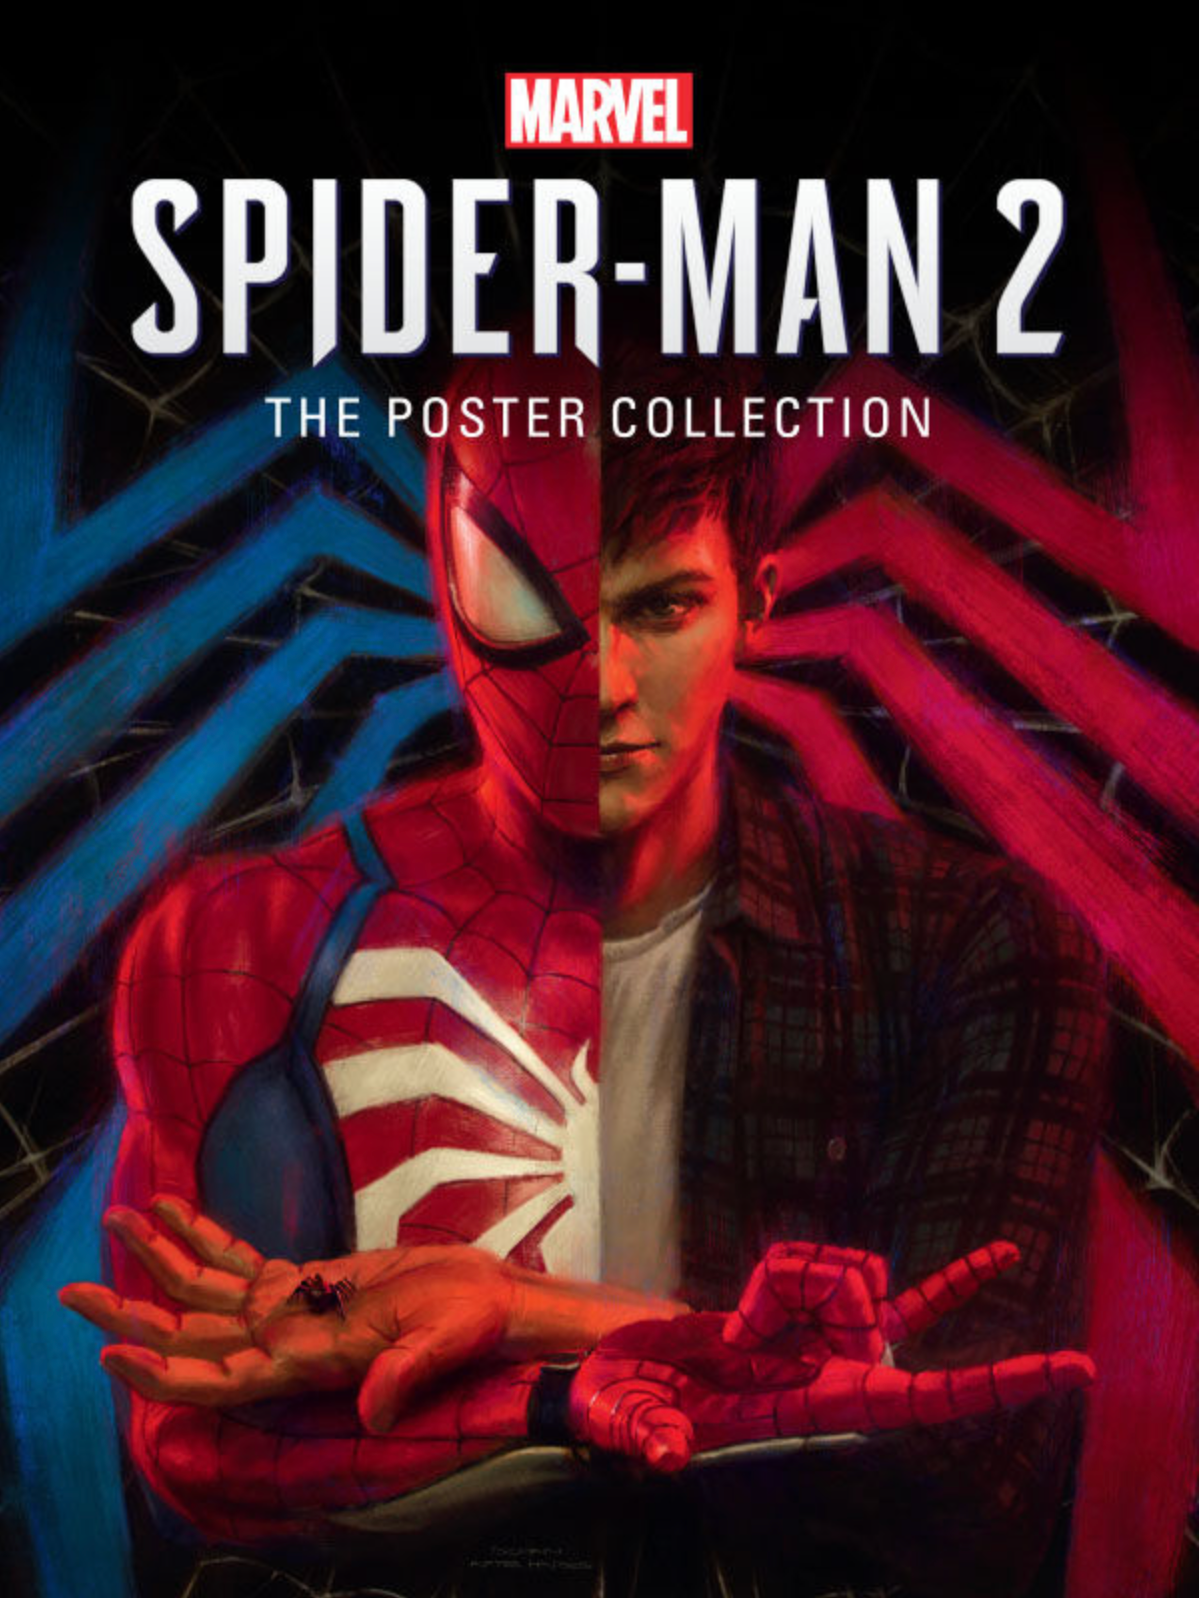 Marvel's Spider-Man 2 The Poster Collection